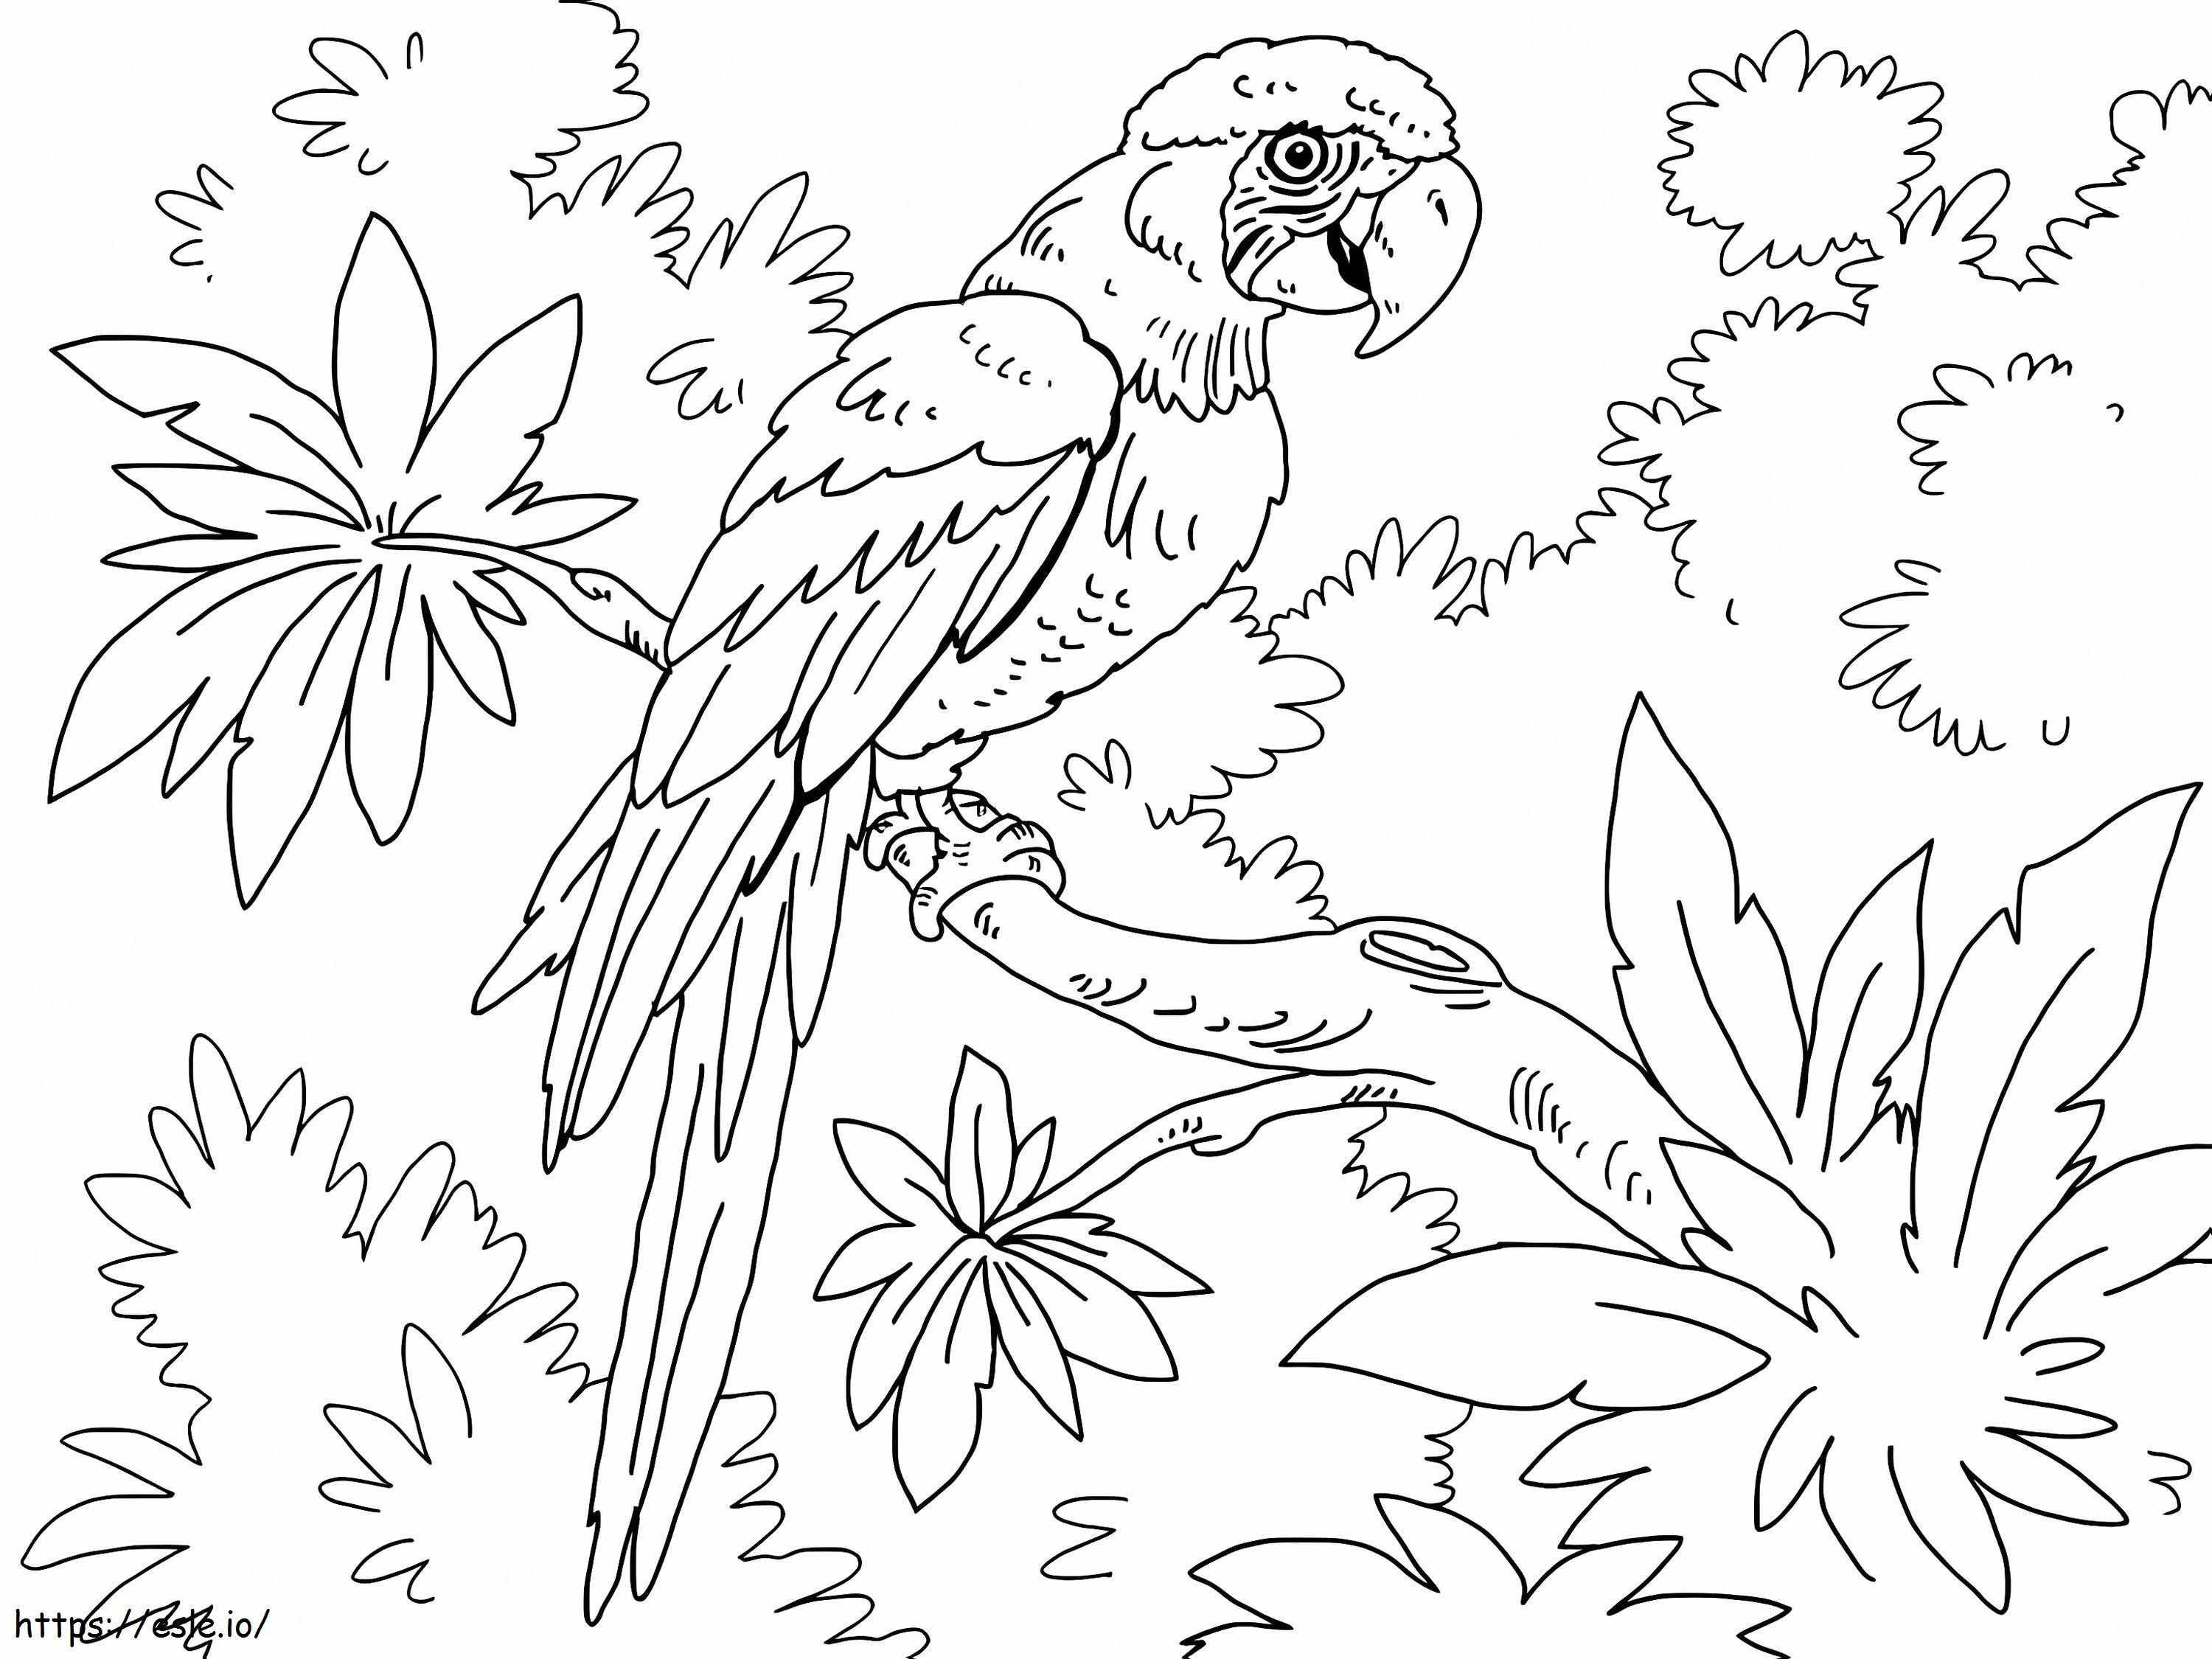 Macaw In The Jungle coloring page